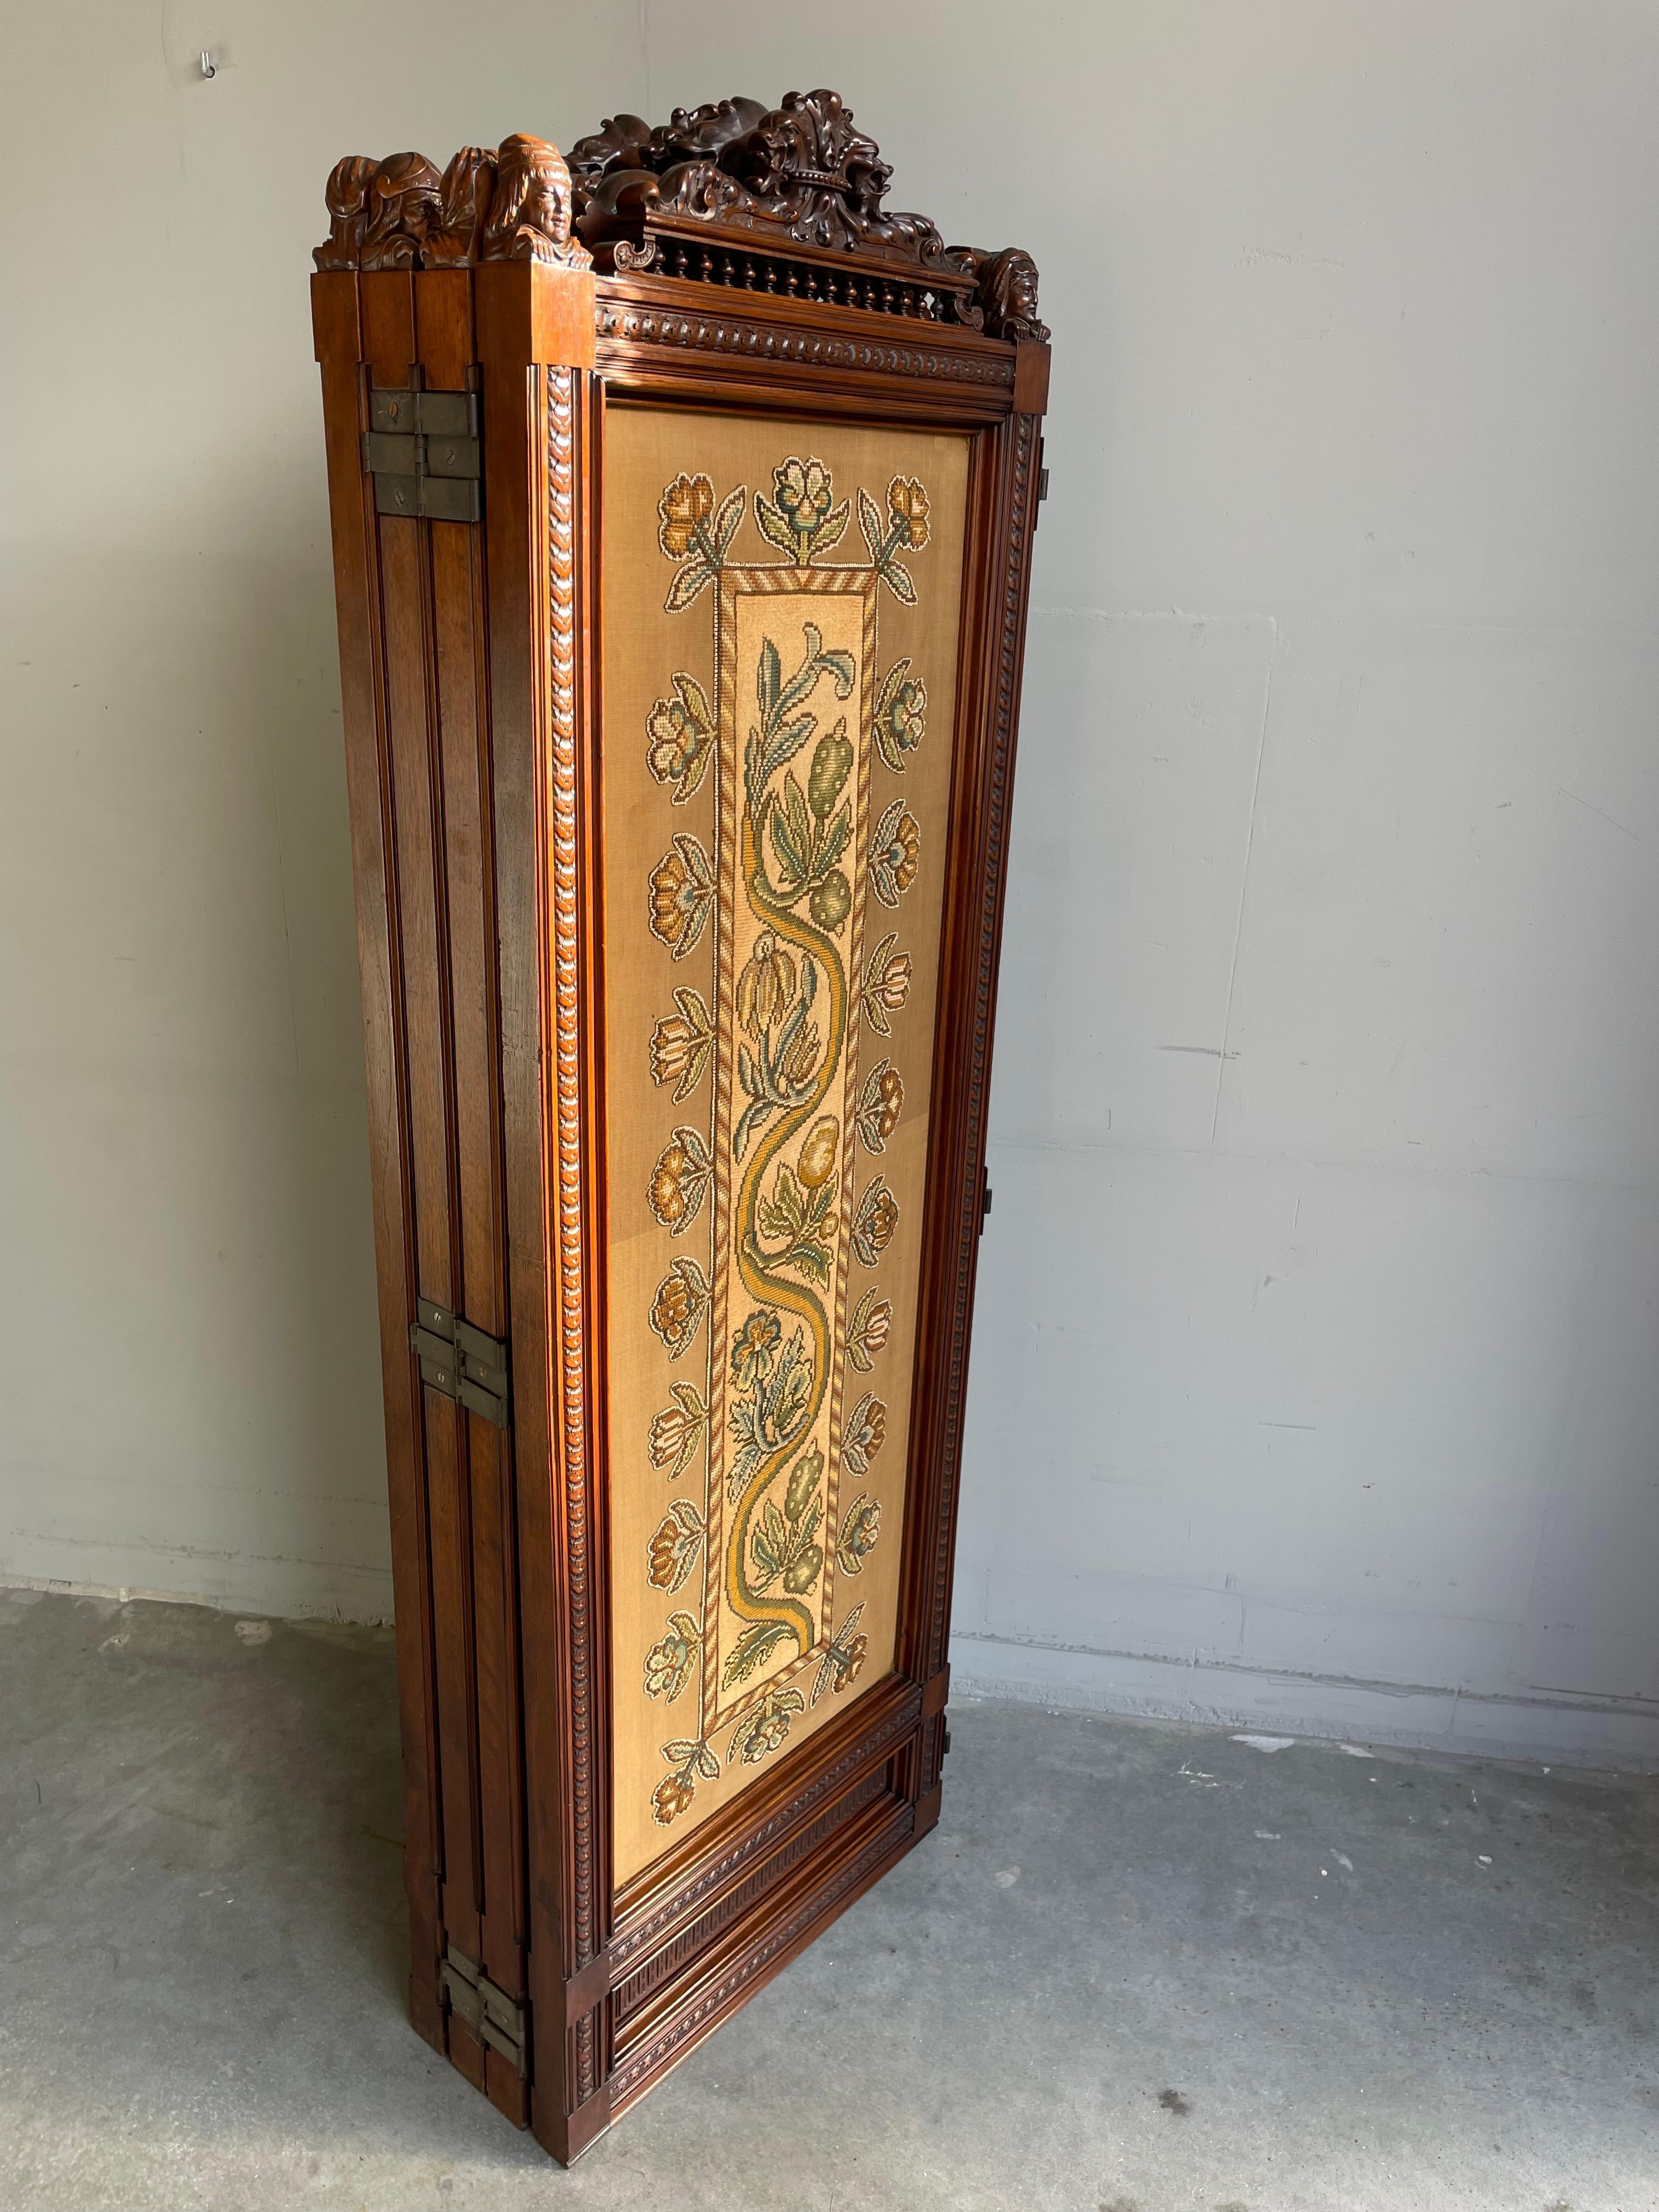 Stunning Renaissance Revival Folding Screen w. Embroidery and 8 Bust Sculptures 7